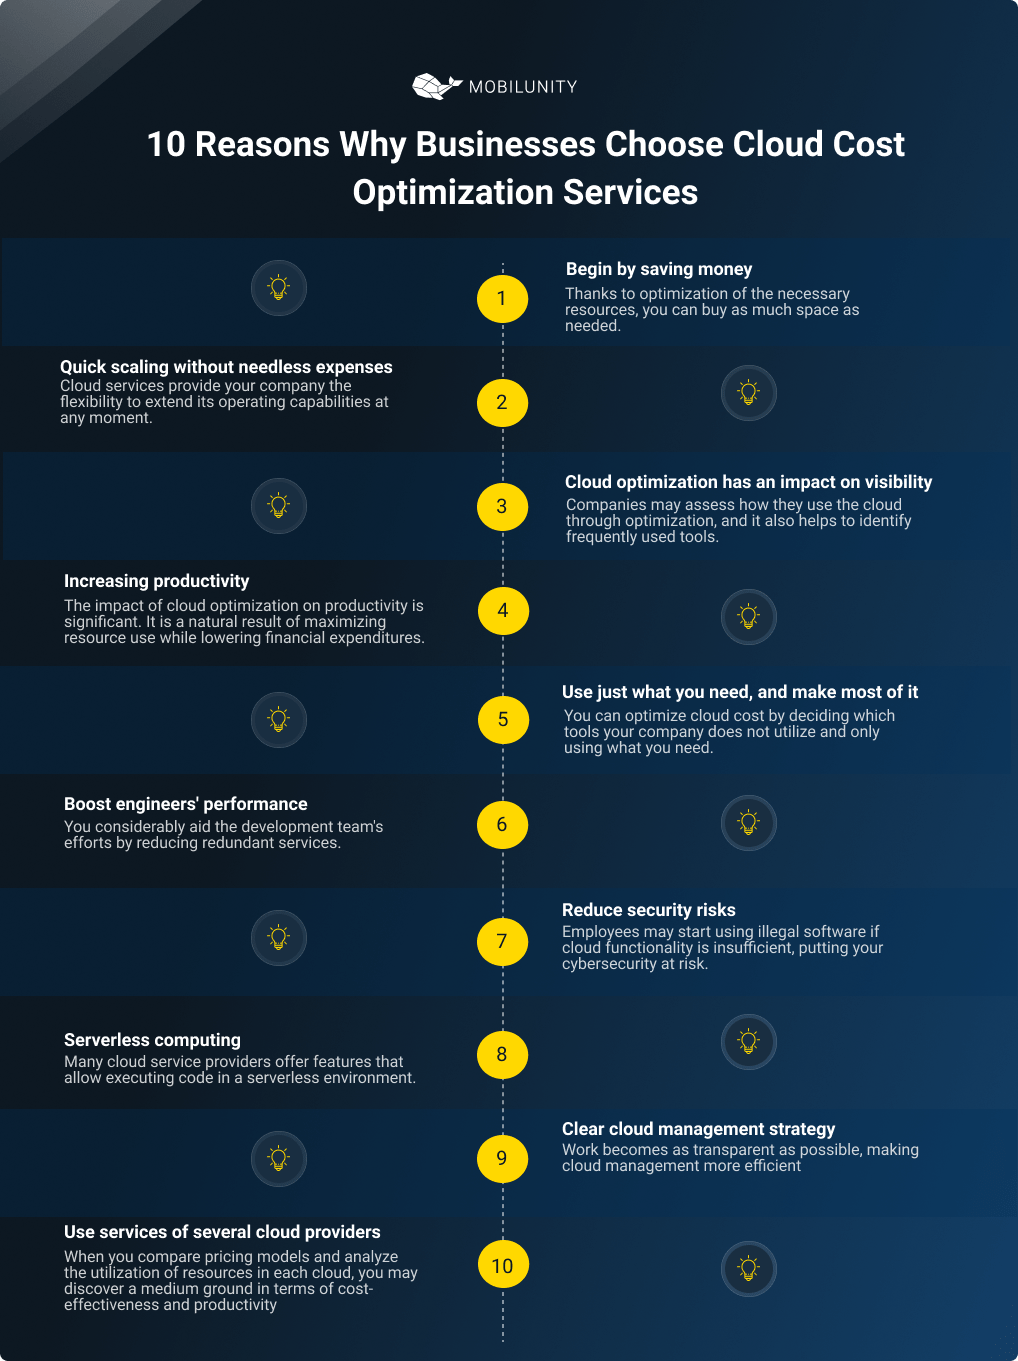 cloud cost optimization service reasons to opt